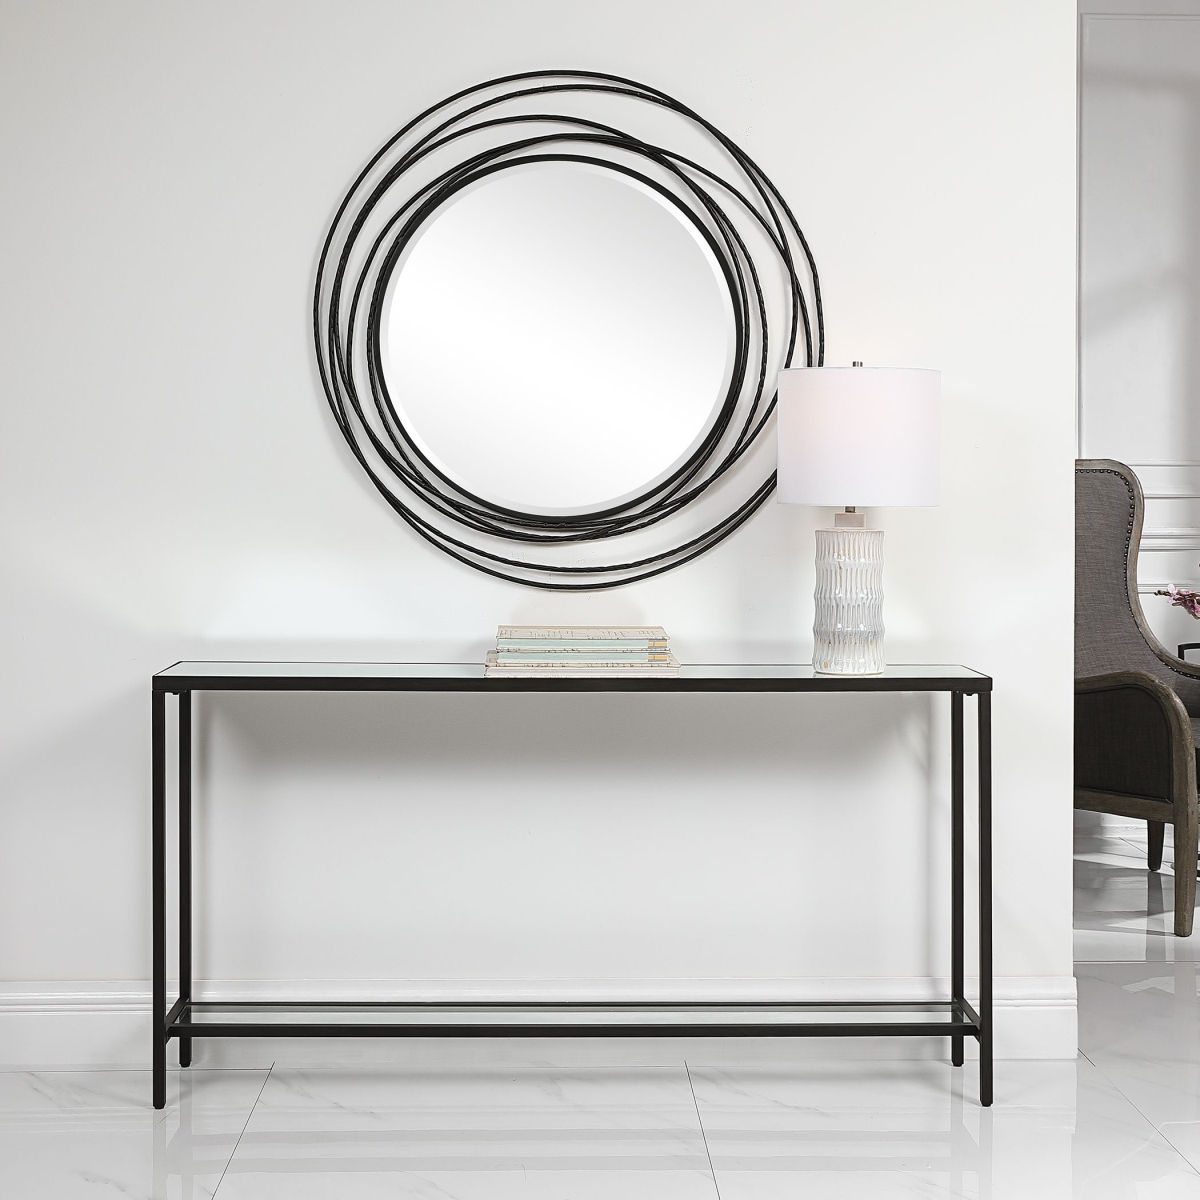 Picture of 212 Main 24997 64 x 6.5 x 15 in. Hayley Console Table  Black